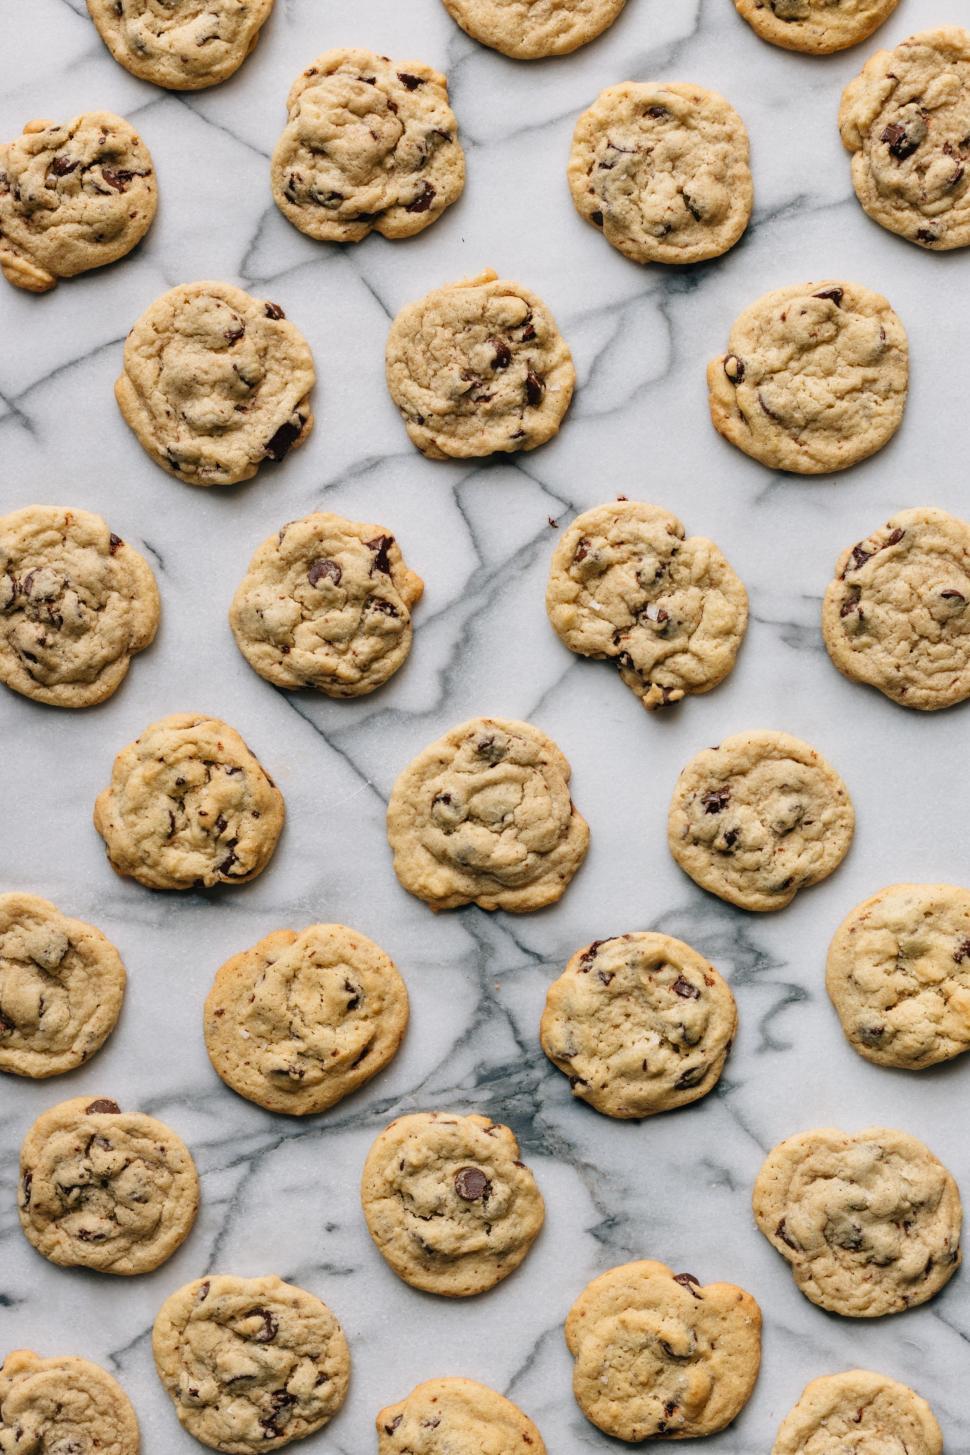 Free Image of Chocolate Chip Cookies on Marble Surface 